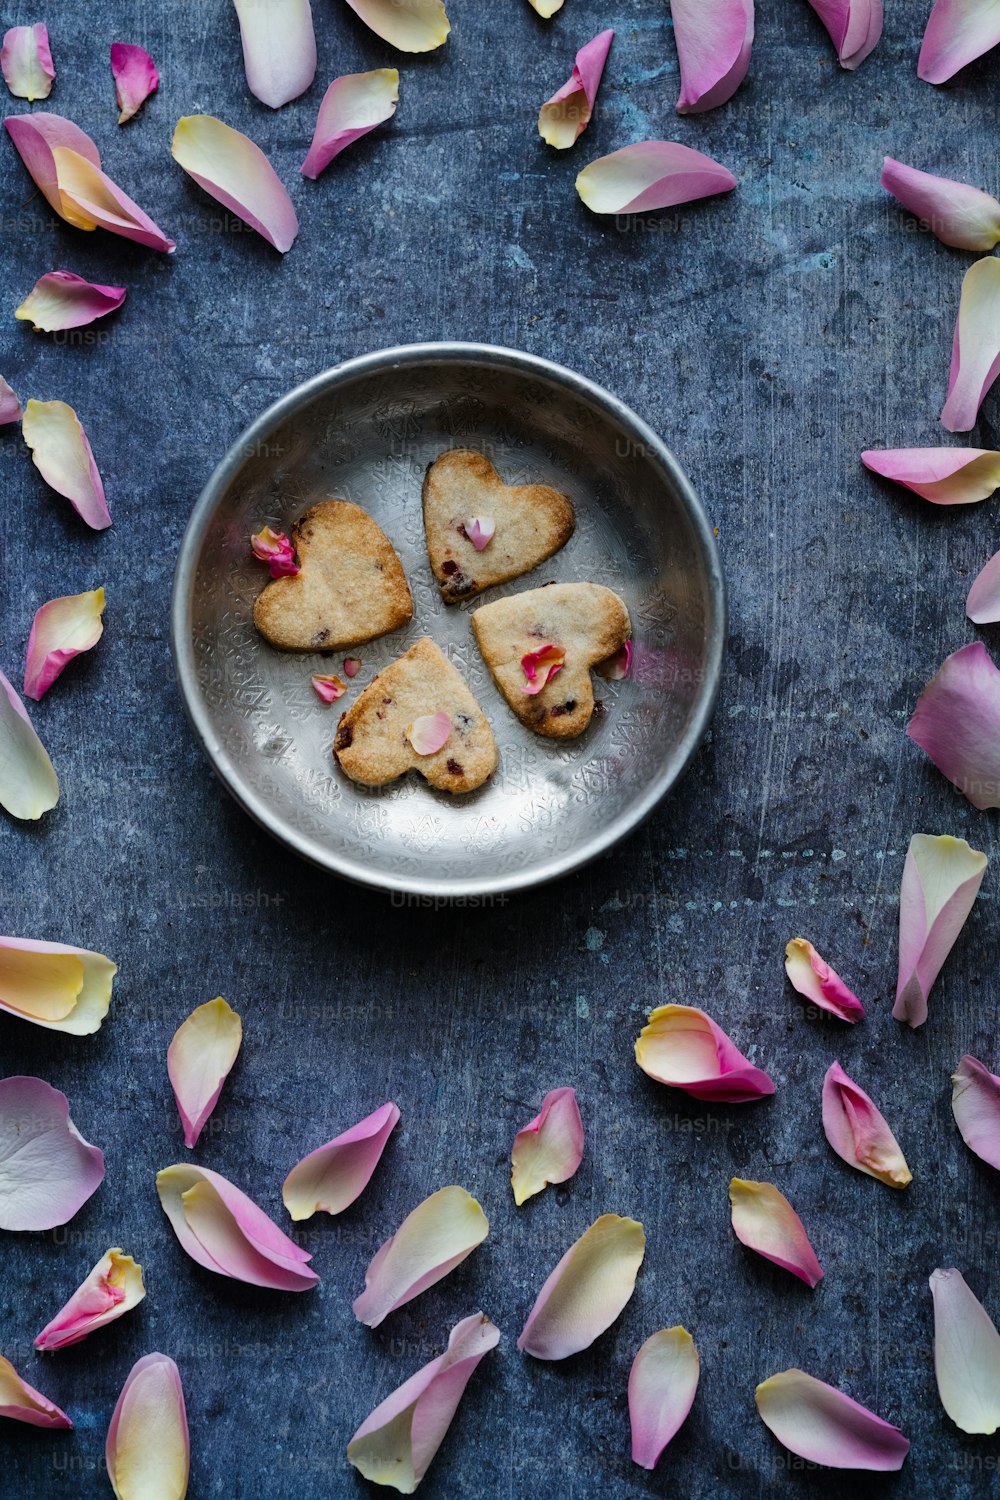 a plate of heart shaped cookies surrounded by petals